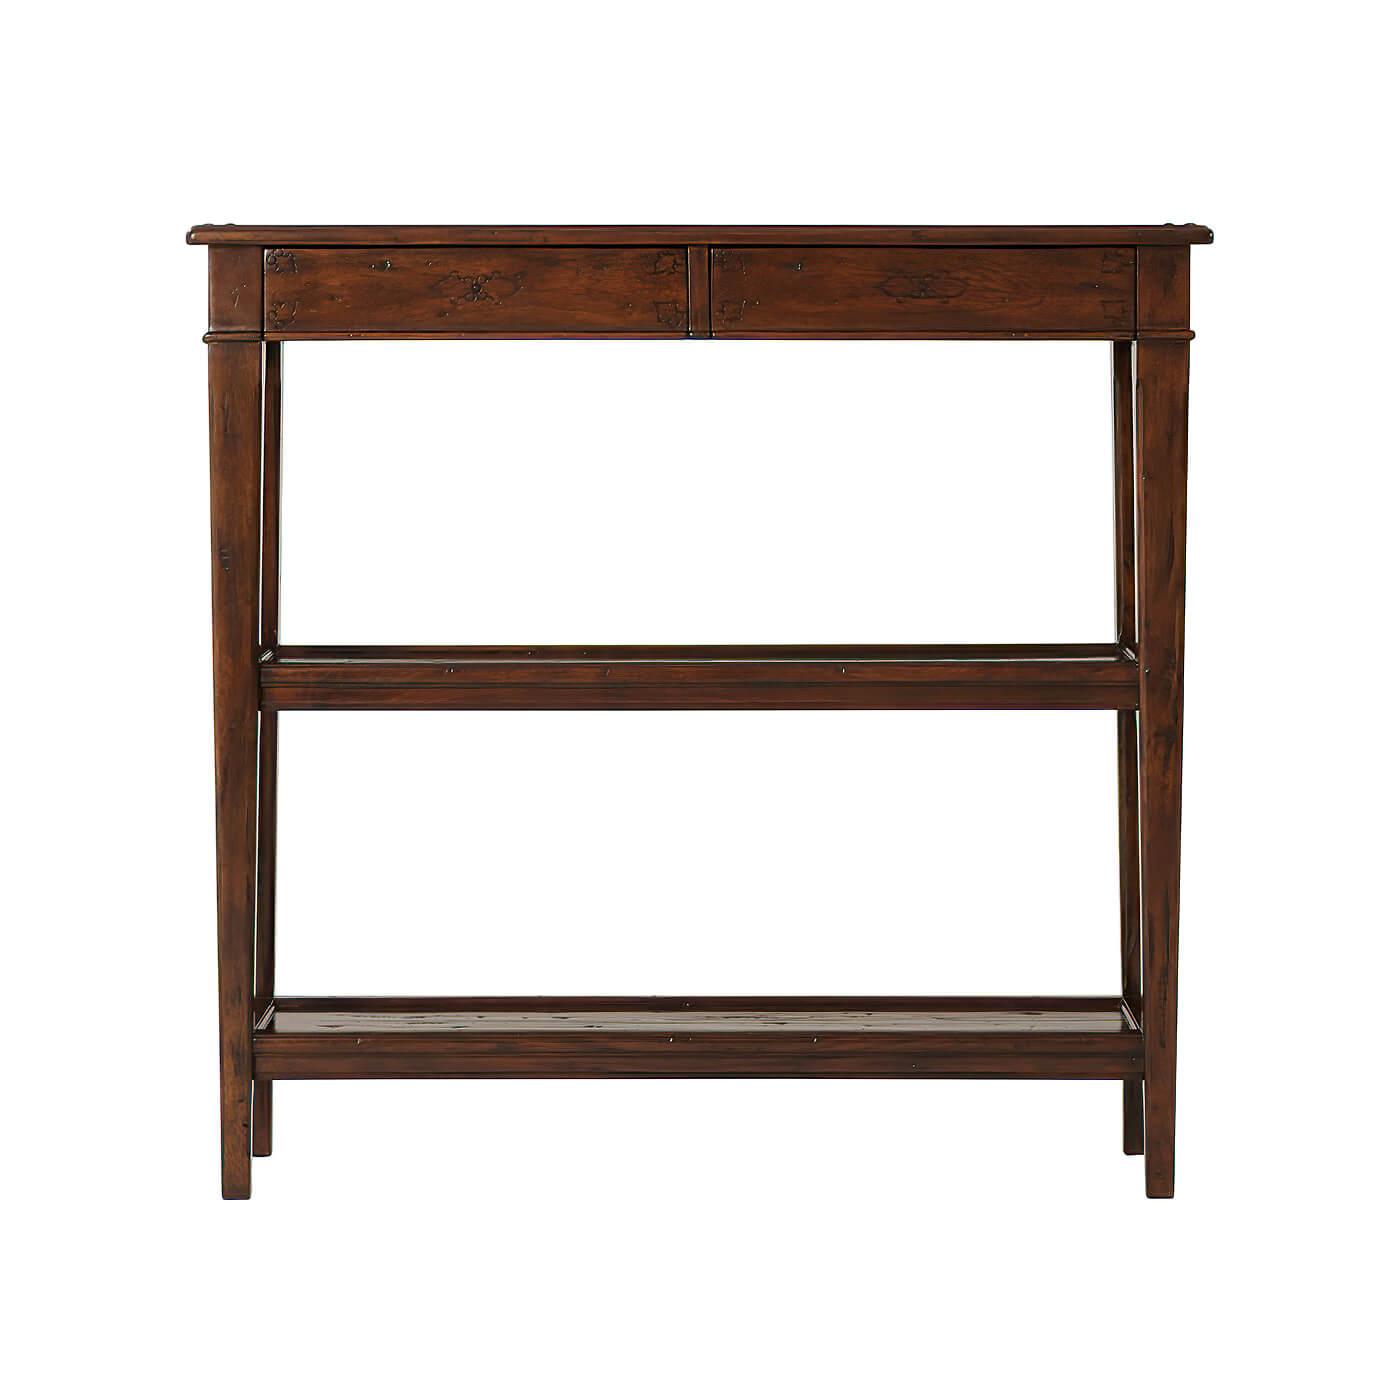 French Provincial Console Table - English Georgian America